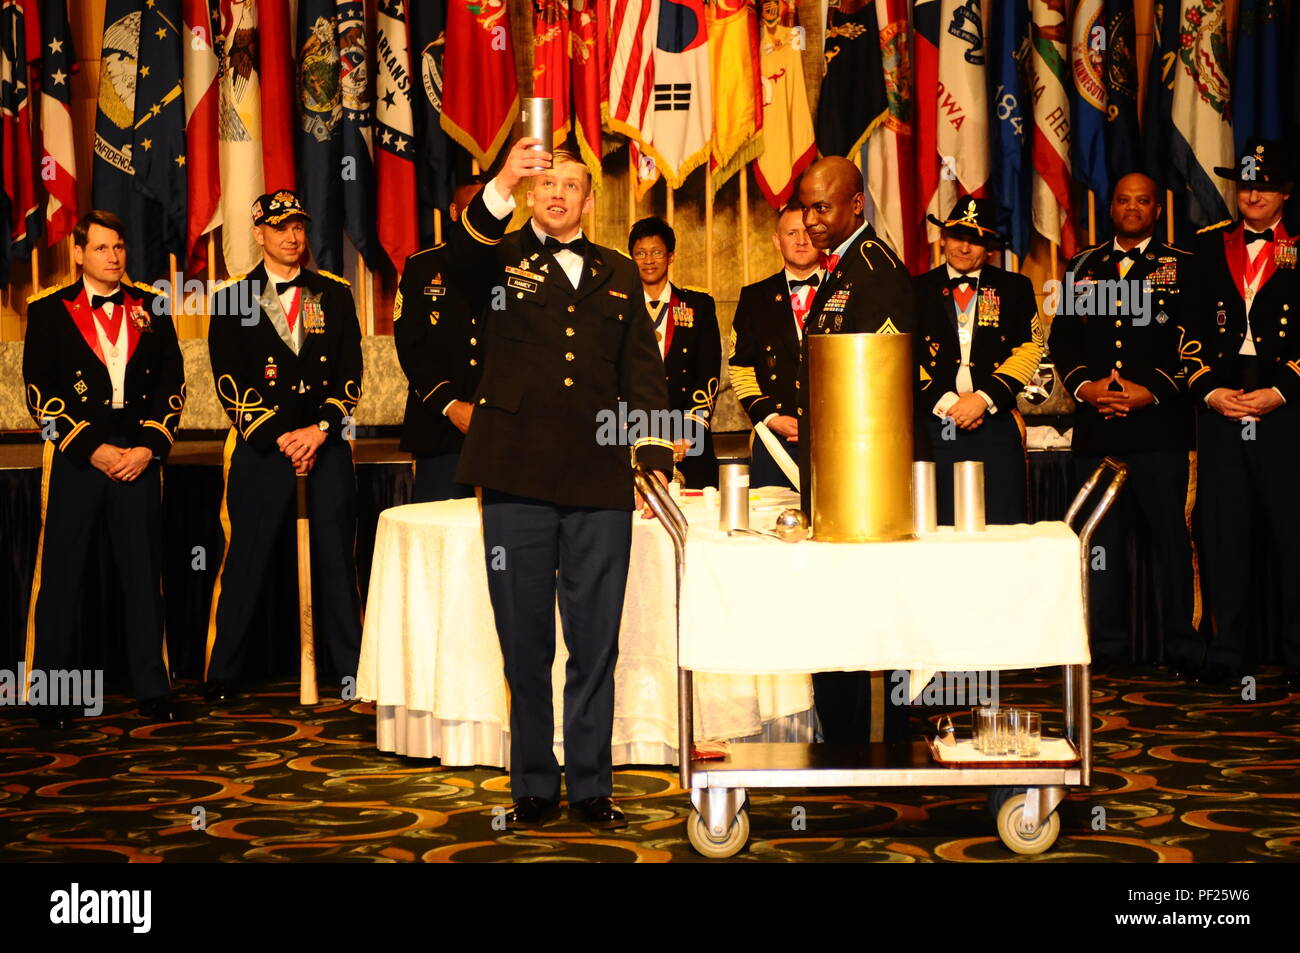 The senior leaders of 210th Field Artillery Brigade, 2nd Infantry Division/ROK-U.S Combined Division, stand ready while the Brigade’s most junior officer samples the mixed punch 'Grog,' Feb. 12, at the Lotte Hotel, Seoul. Drinking from the 'Grog Bowl' is a historical tradition seen at the Saint Barbara’s Day Ball, representing the strength and unity of the artillery Soldiers. Stock Photo